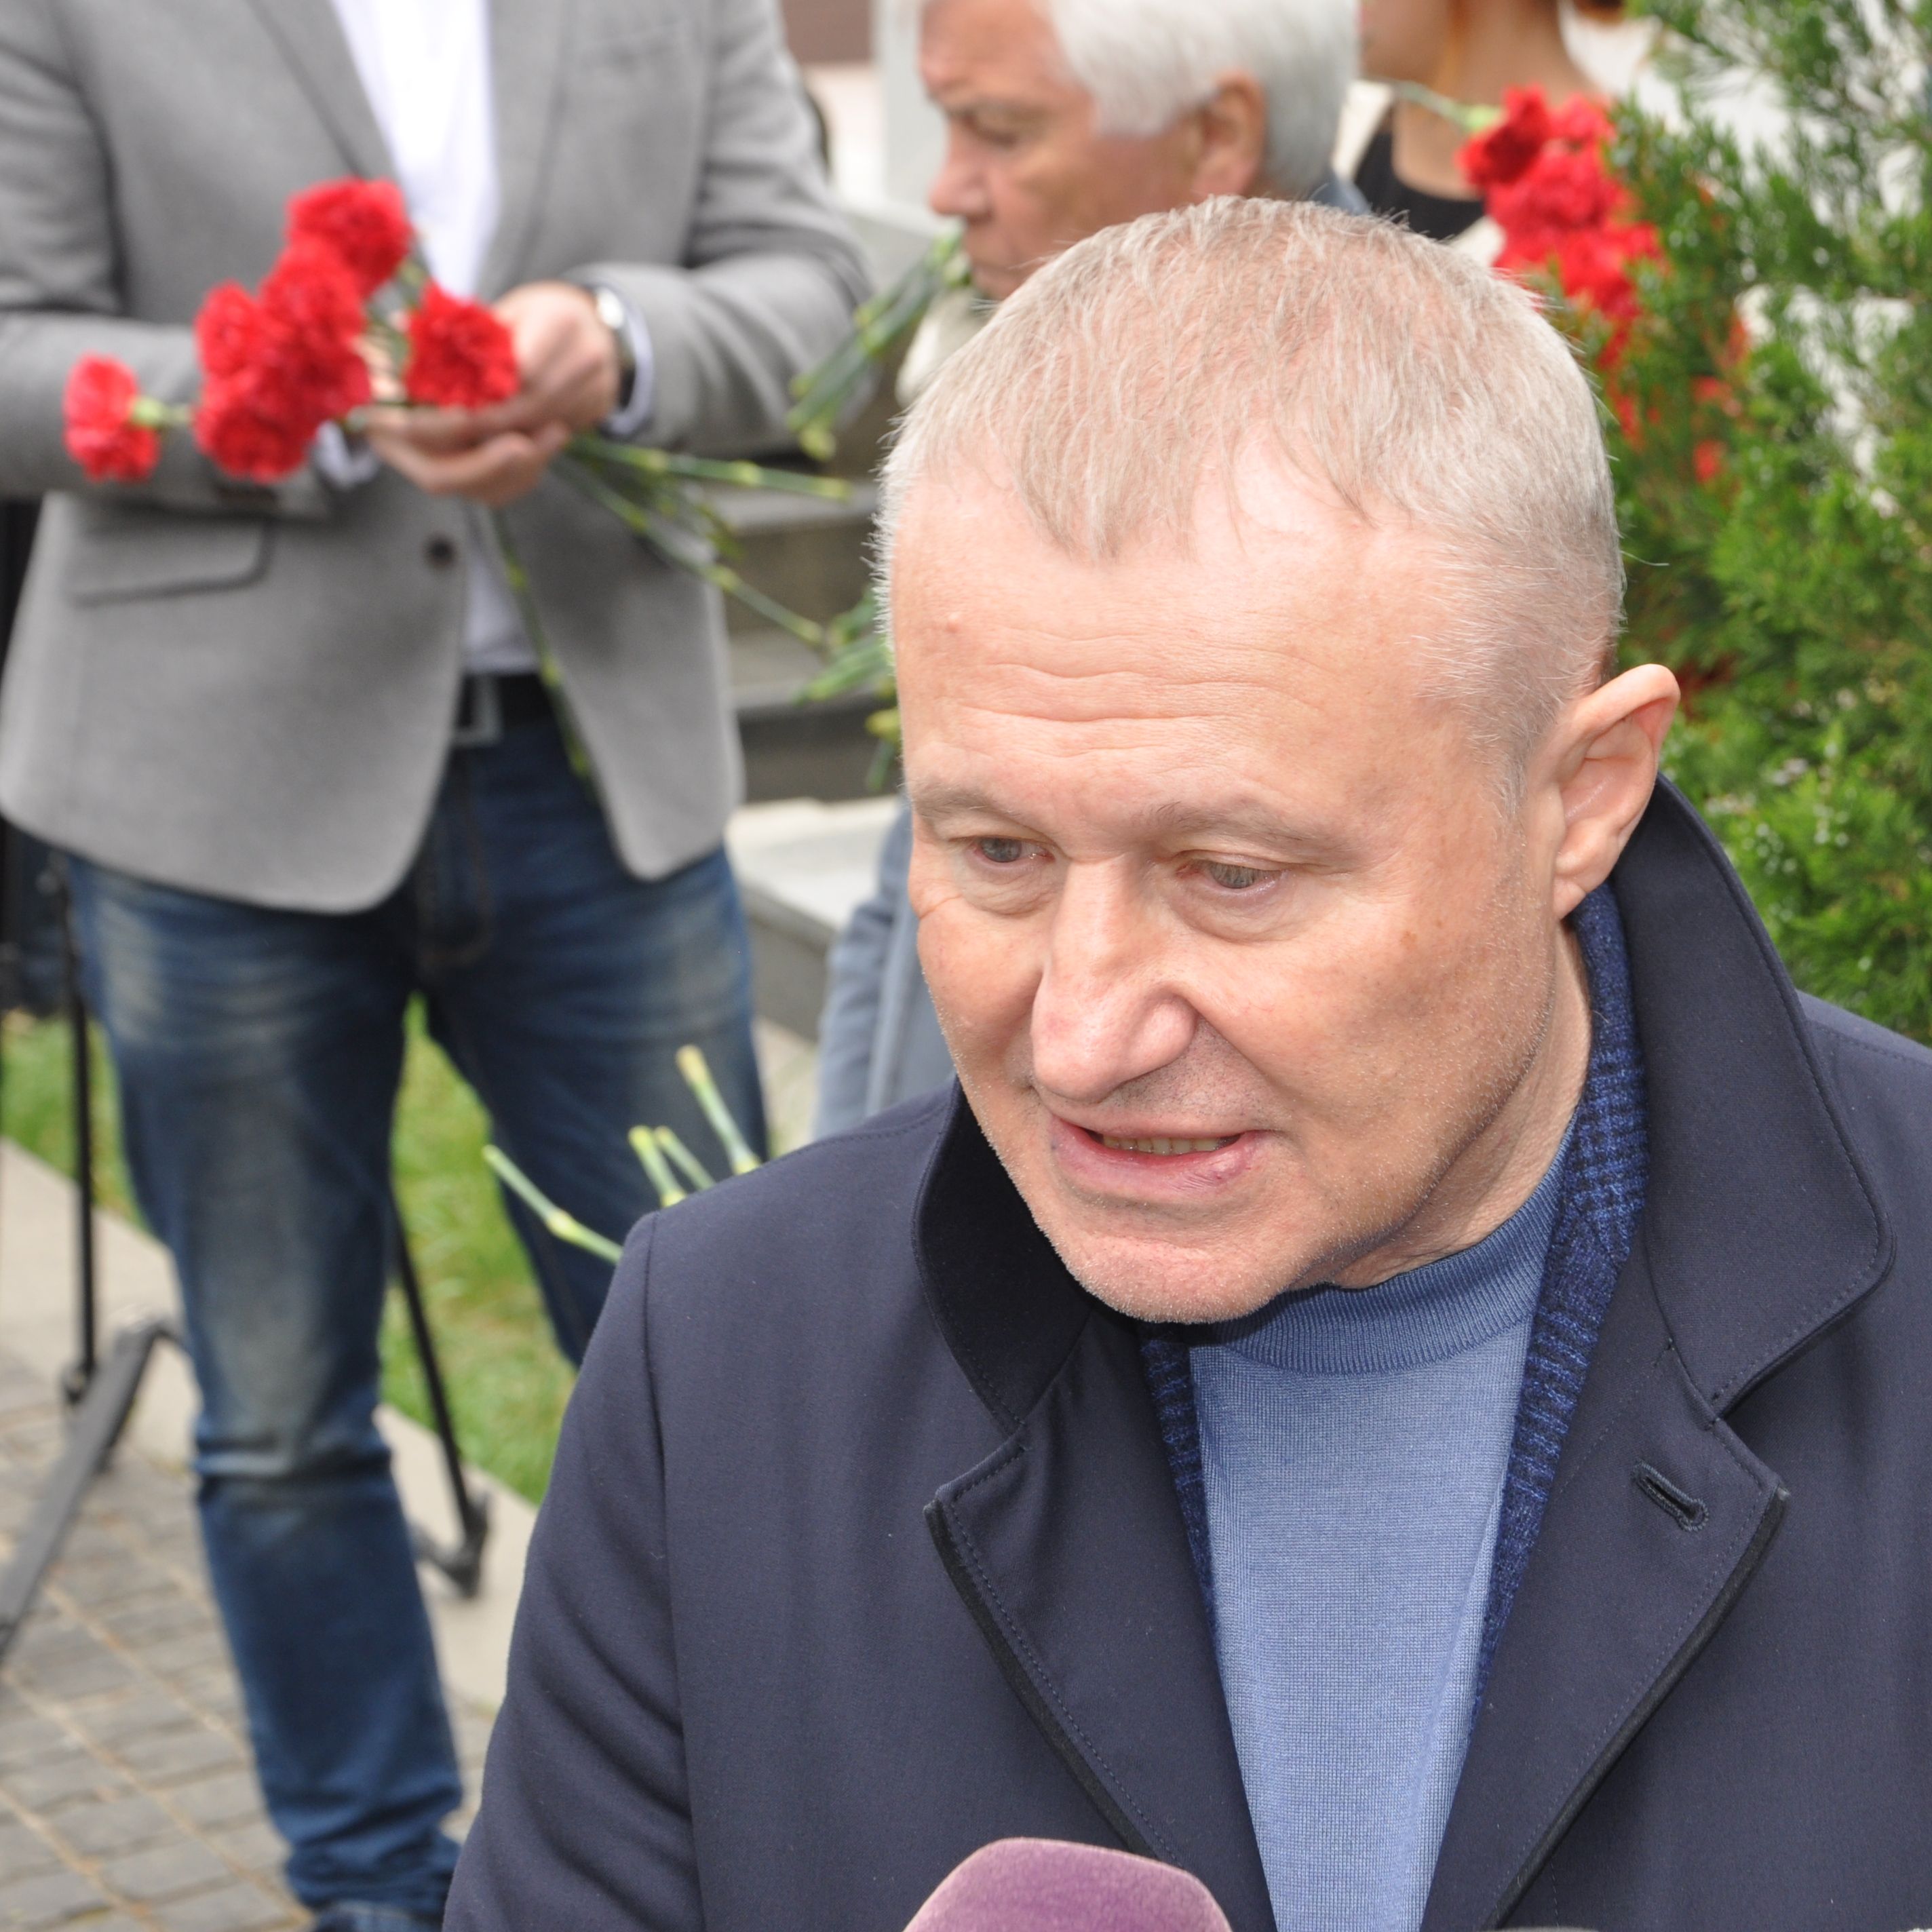 Hryhoriy SURKIS: “Dynamo are not for sale!”